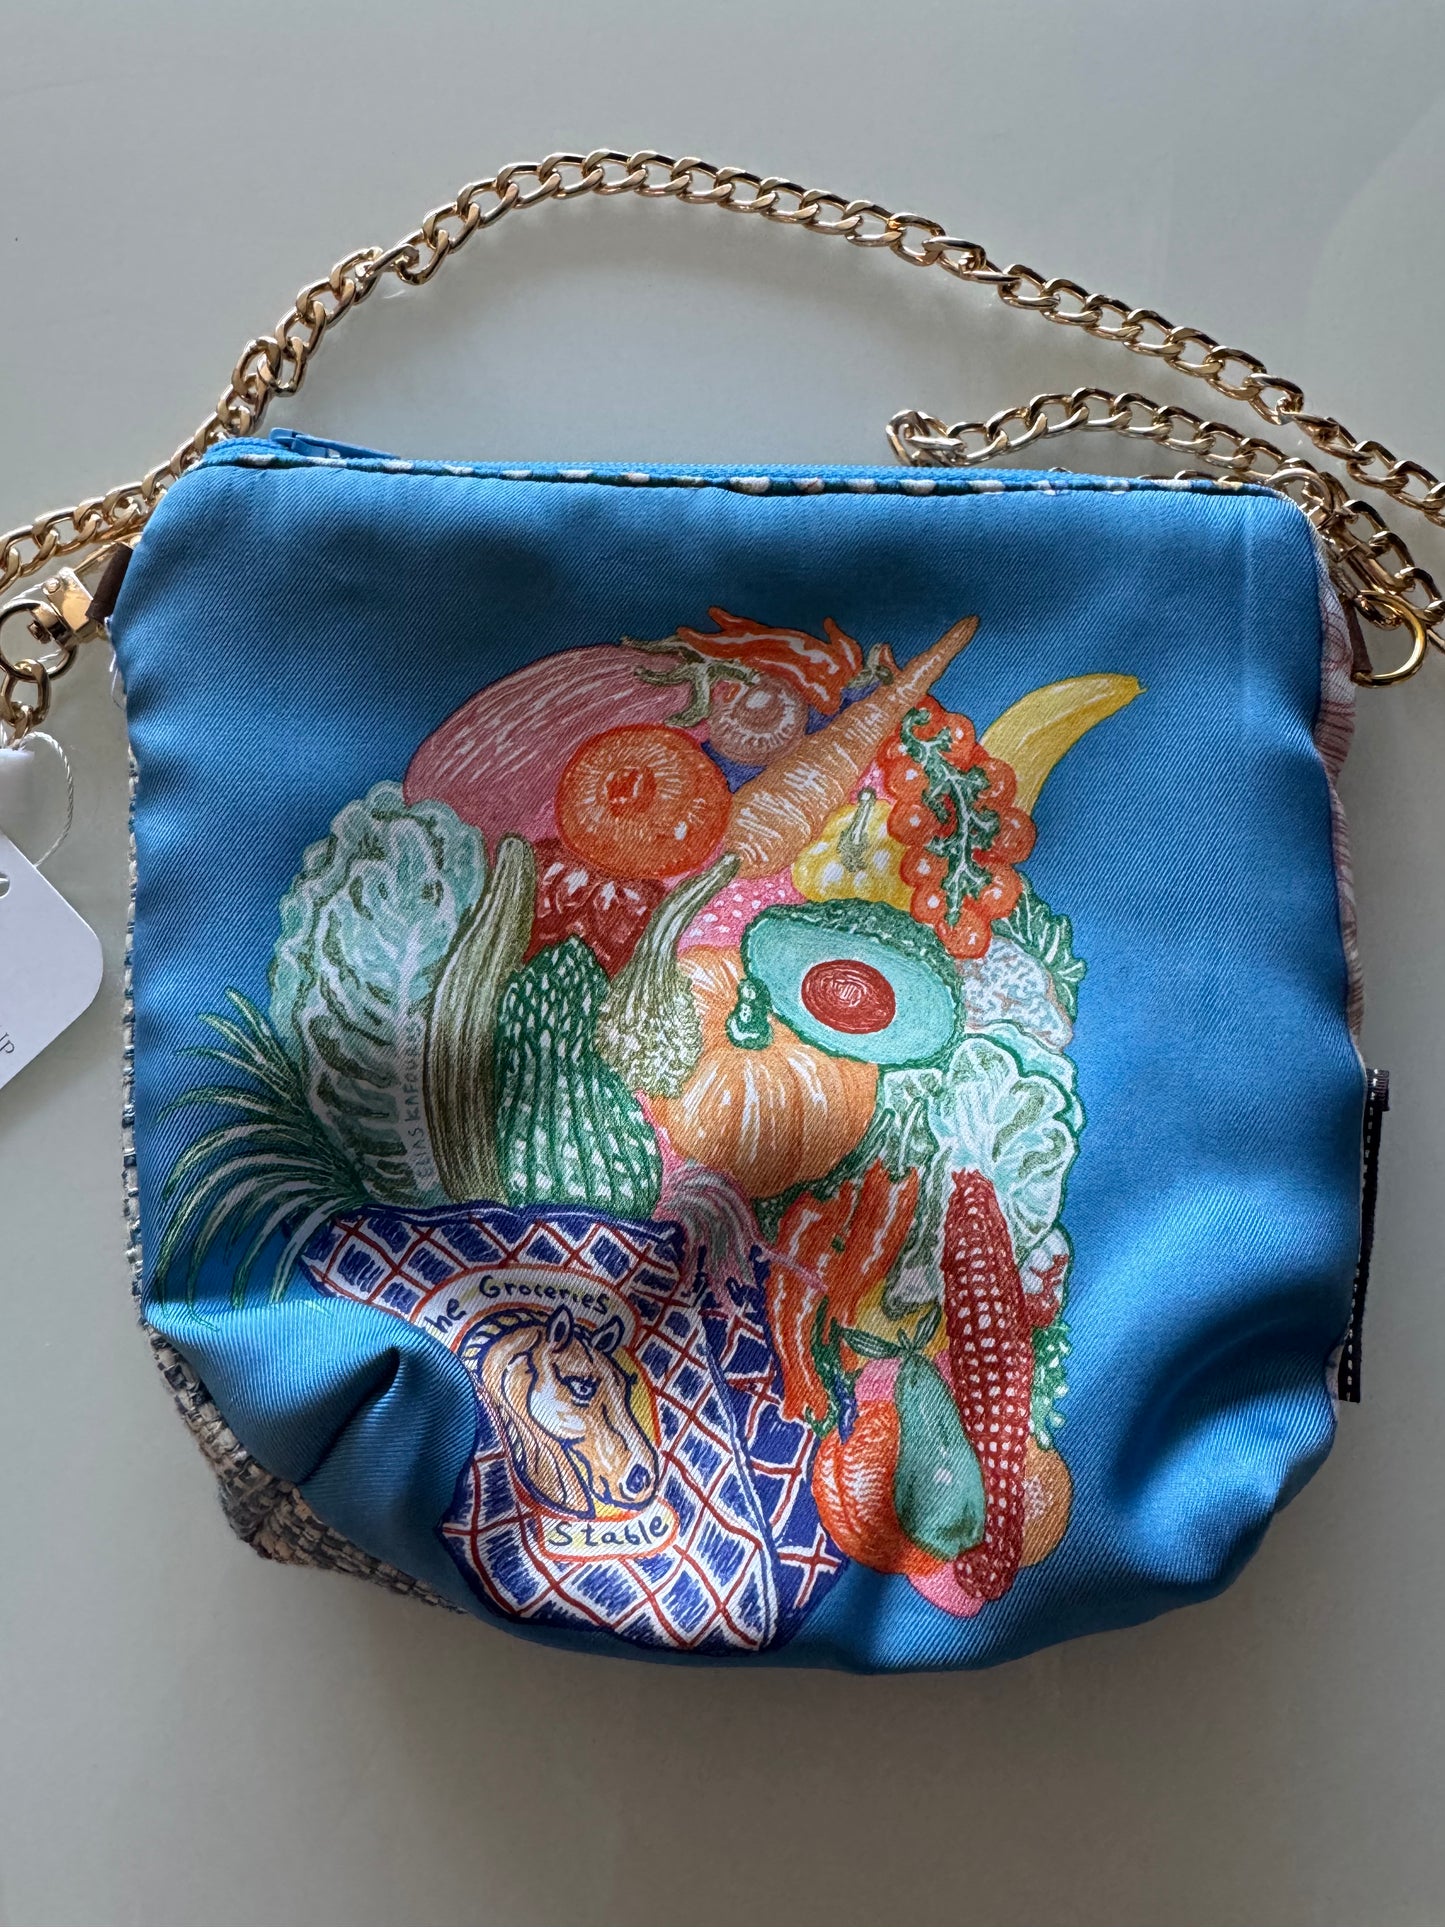 Vintage Scarf reimagined into a crossbody bag. Measures 7 x 7